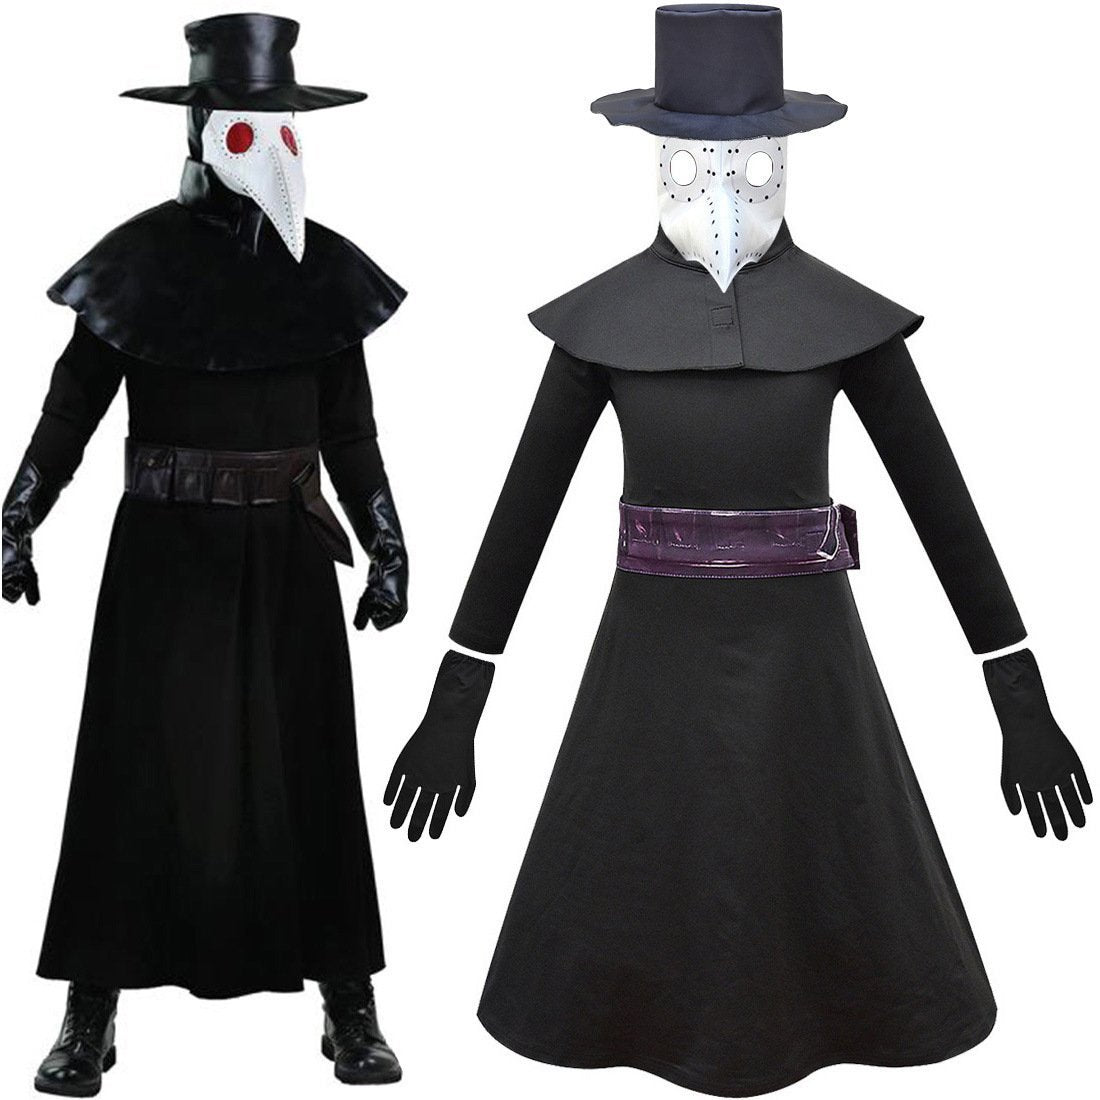 Kids Plague Doctor Cosplay Costume Long Robe Cape Outfits Steampunk Dress